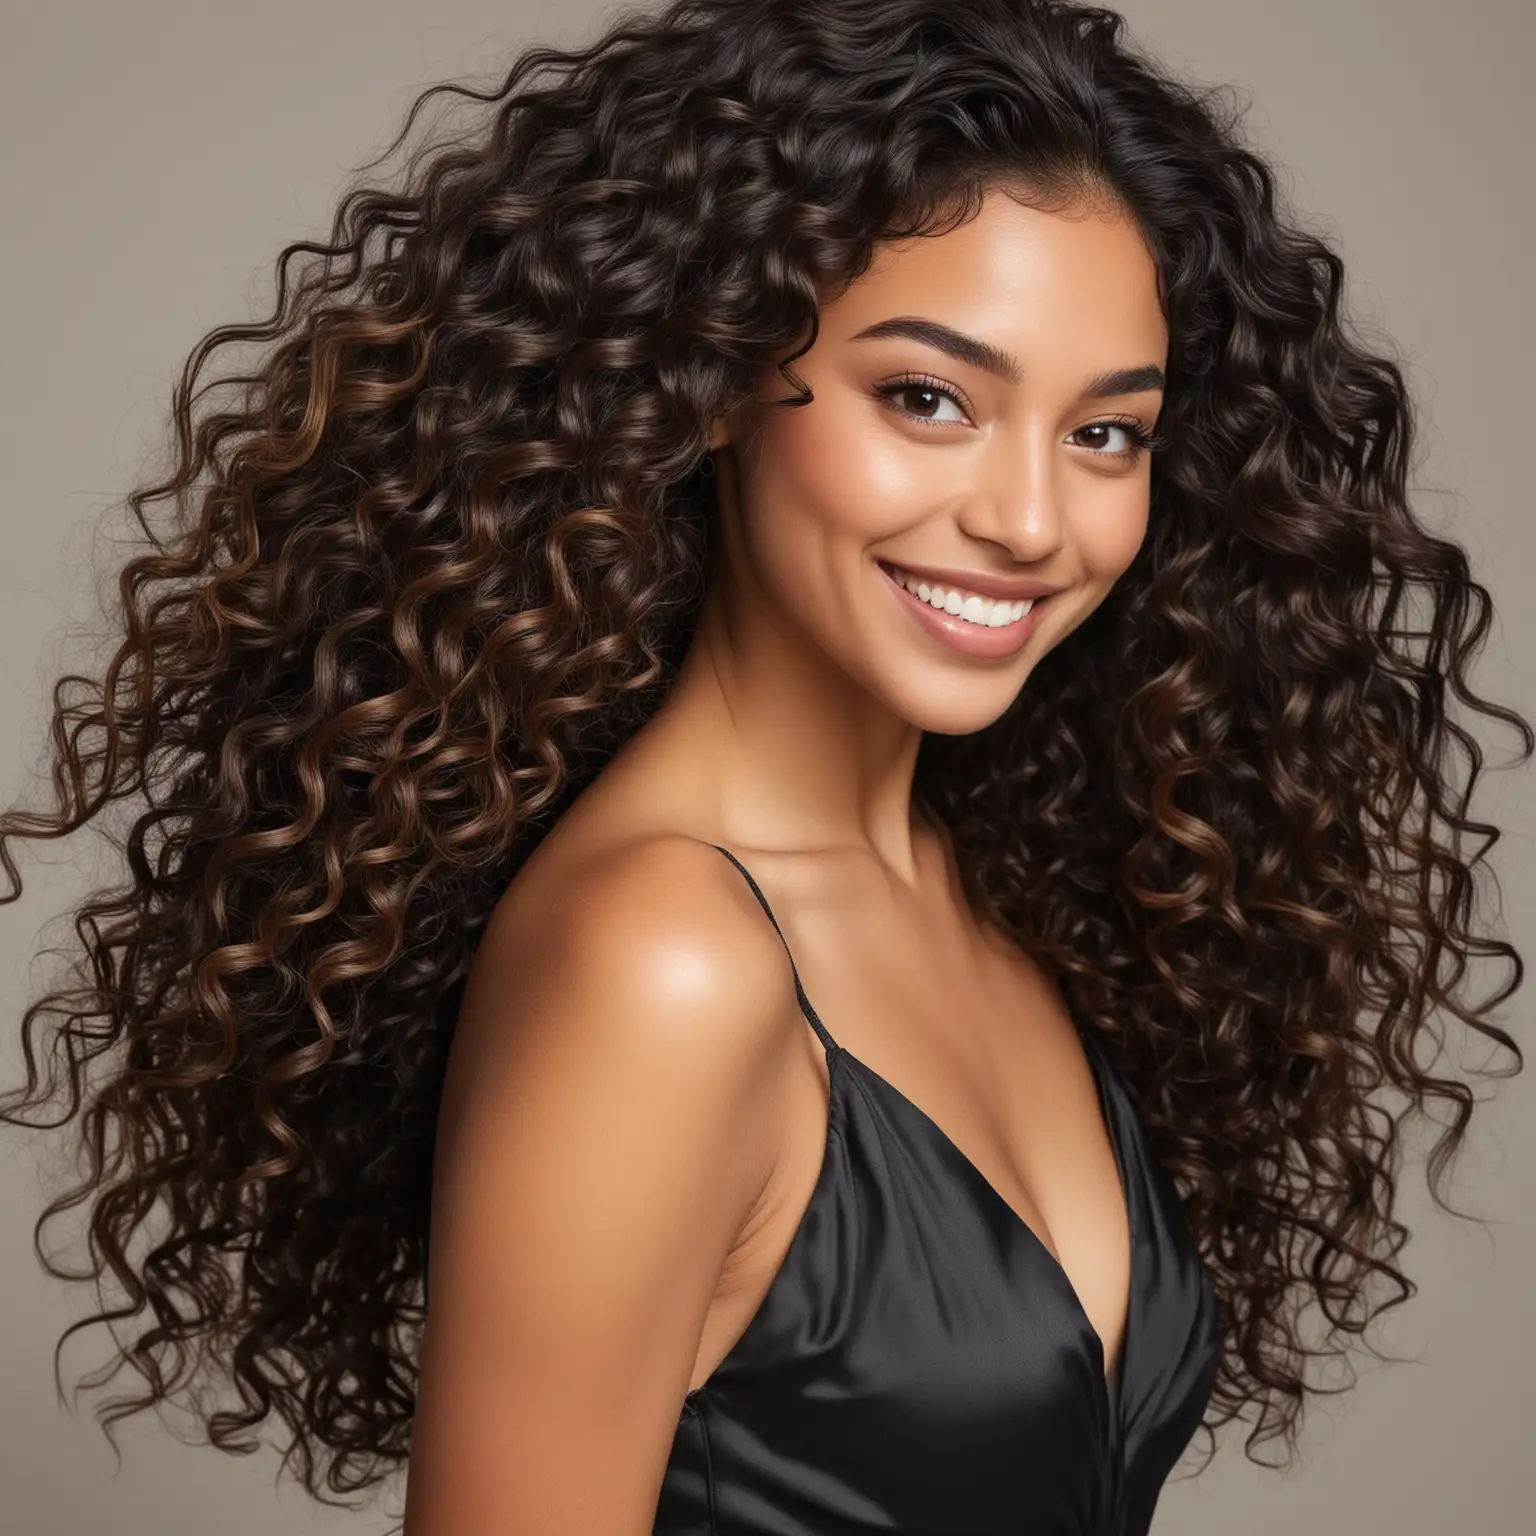 black hair model in long natural curly hair highlighted  balayage smiling. She is wearing satin dress